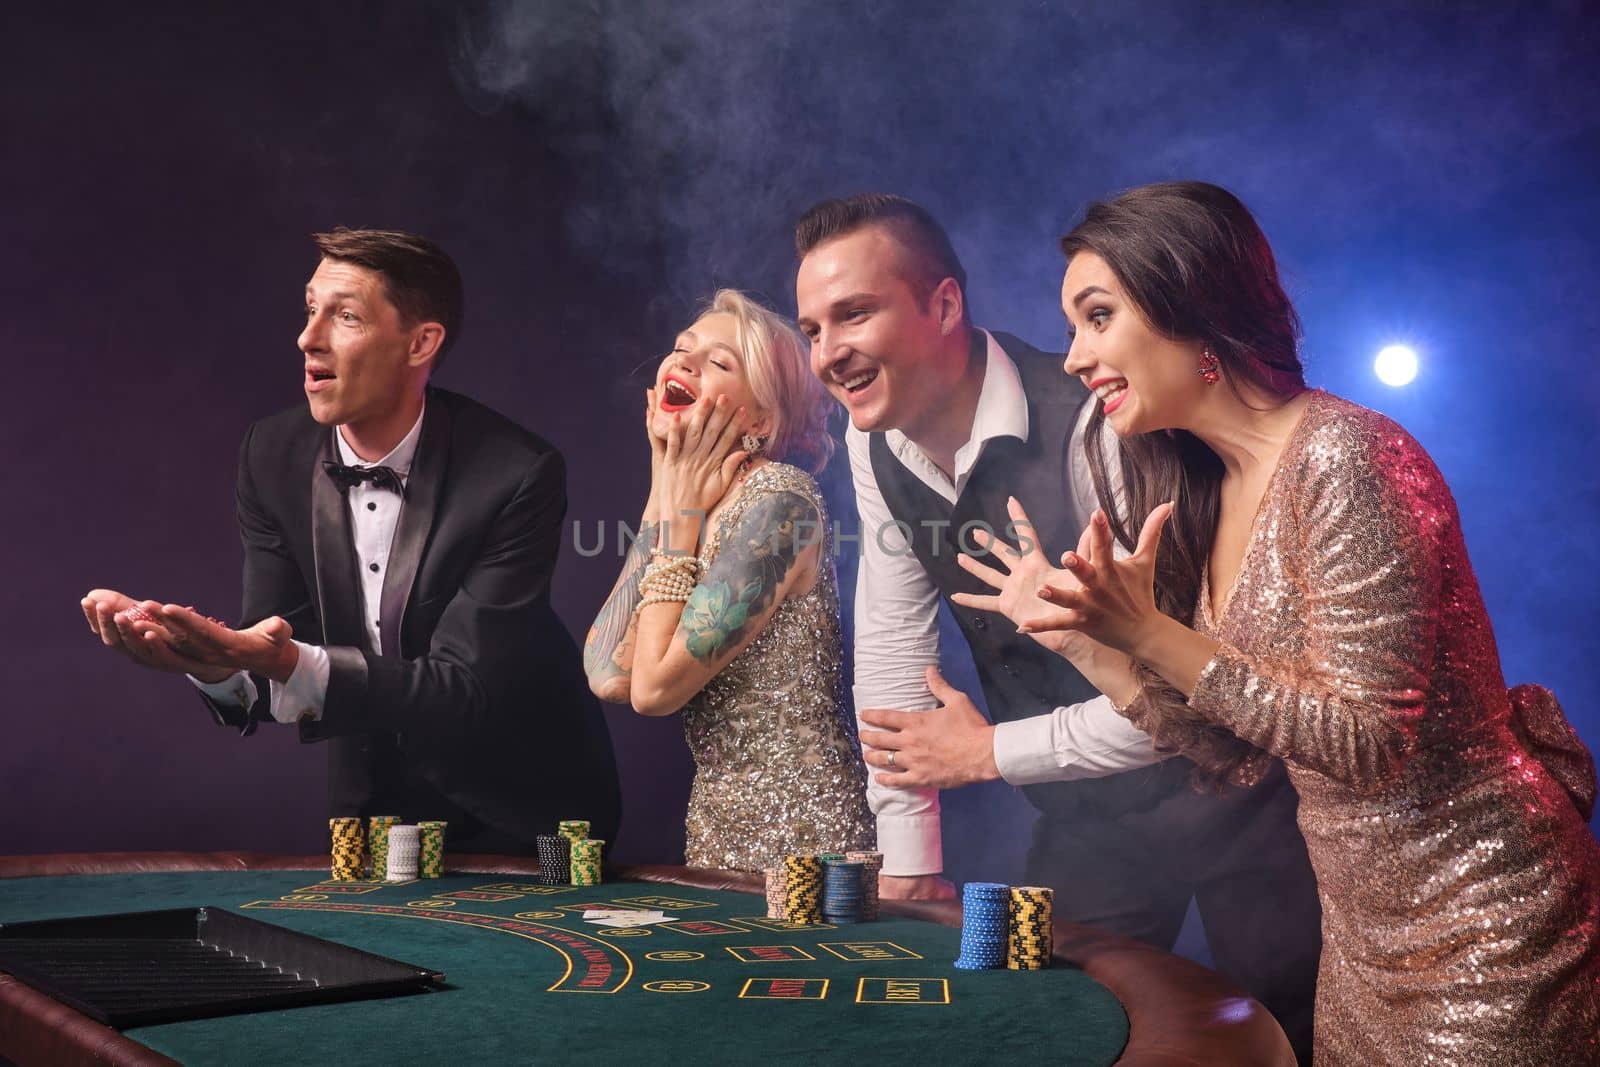 Side shot of a joyful rich classmates playing poker at casino in smoke. Youth are making bets waiting for a big win. They are laughing standing at the table against a red and blue backlights on black background. Risky gambling entertainment.